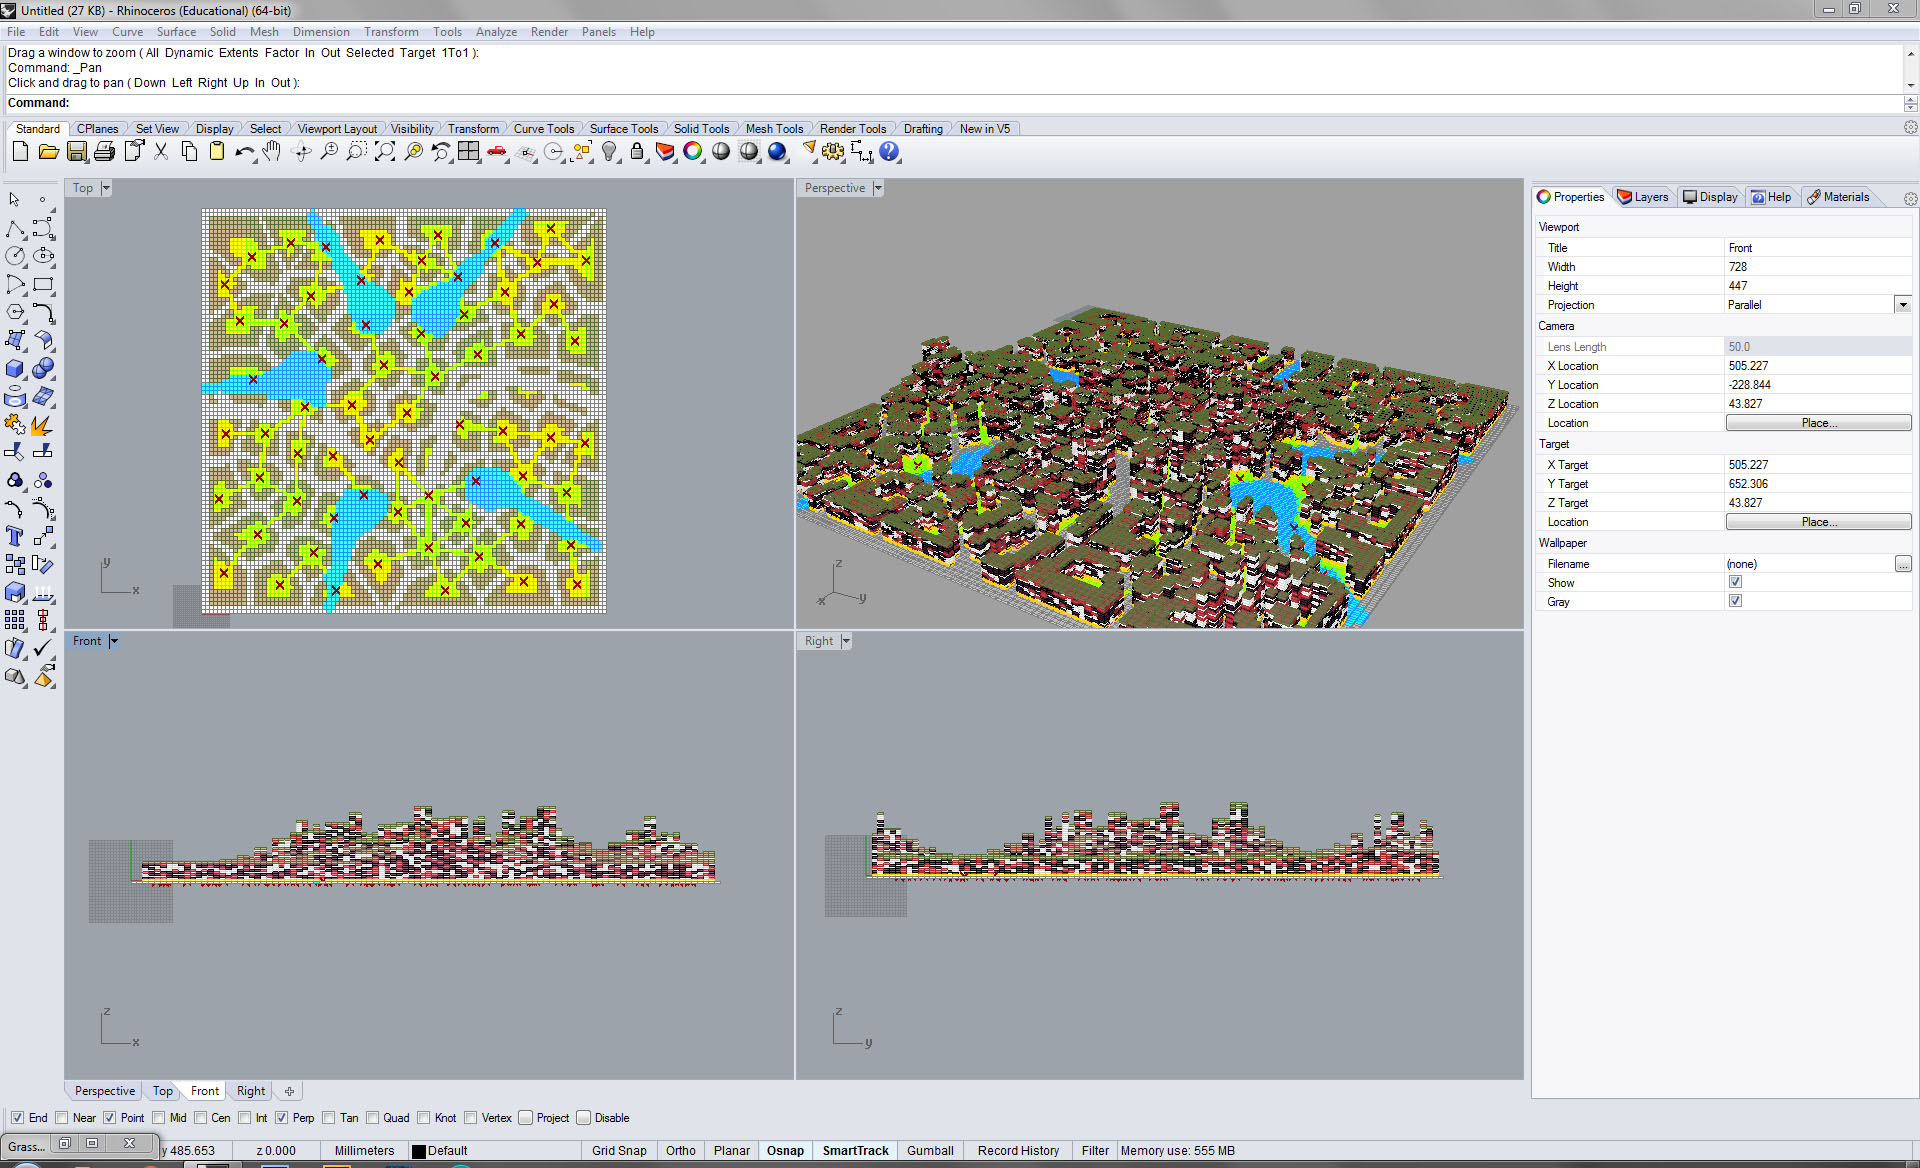 Developing the city in rhino 3d